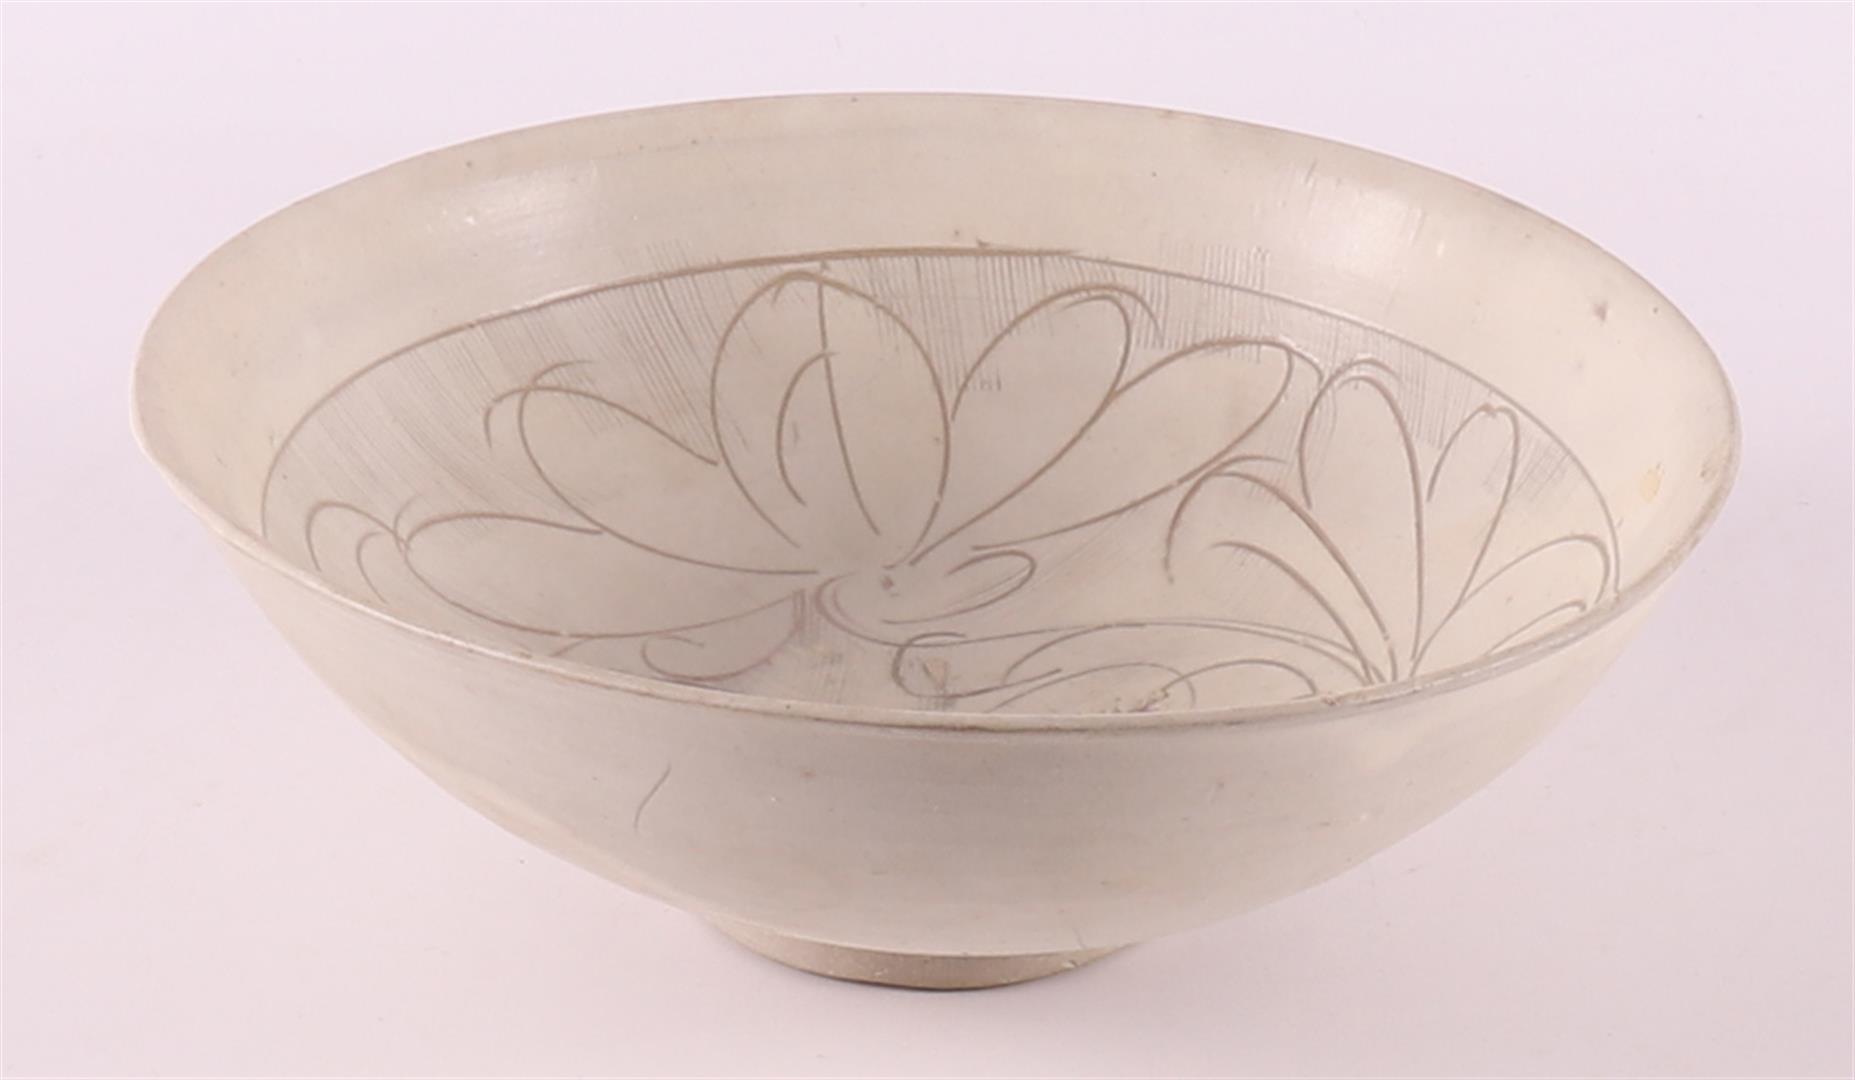 A white porcelain bowl with sgraffito decor, China, Sung, 12th/13th C.